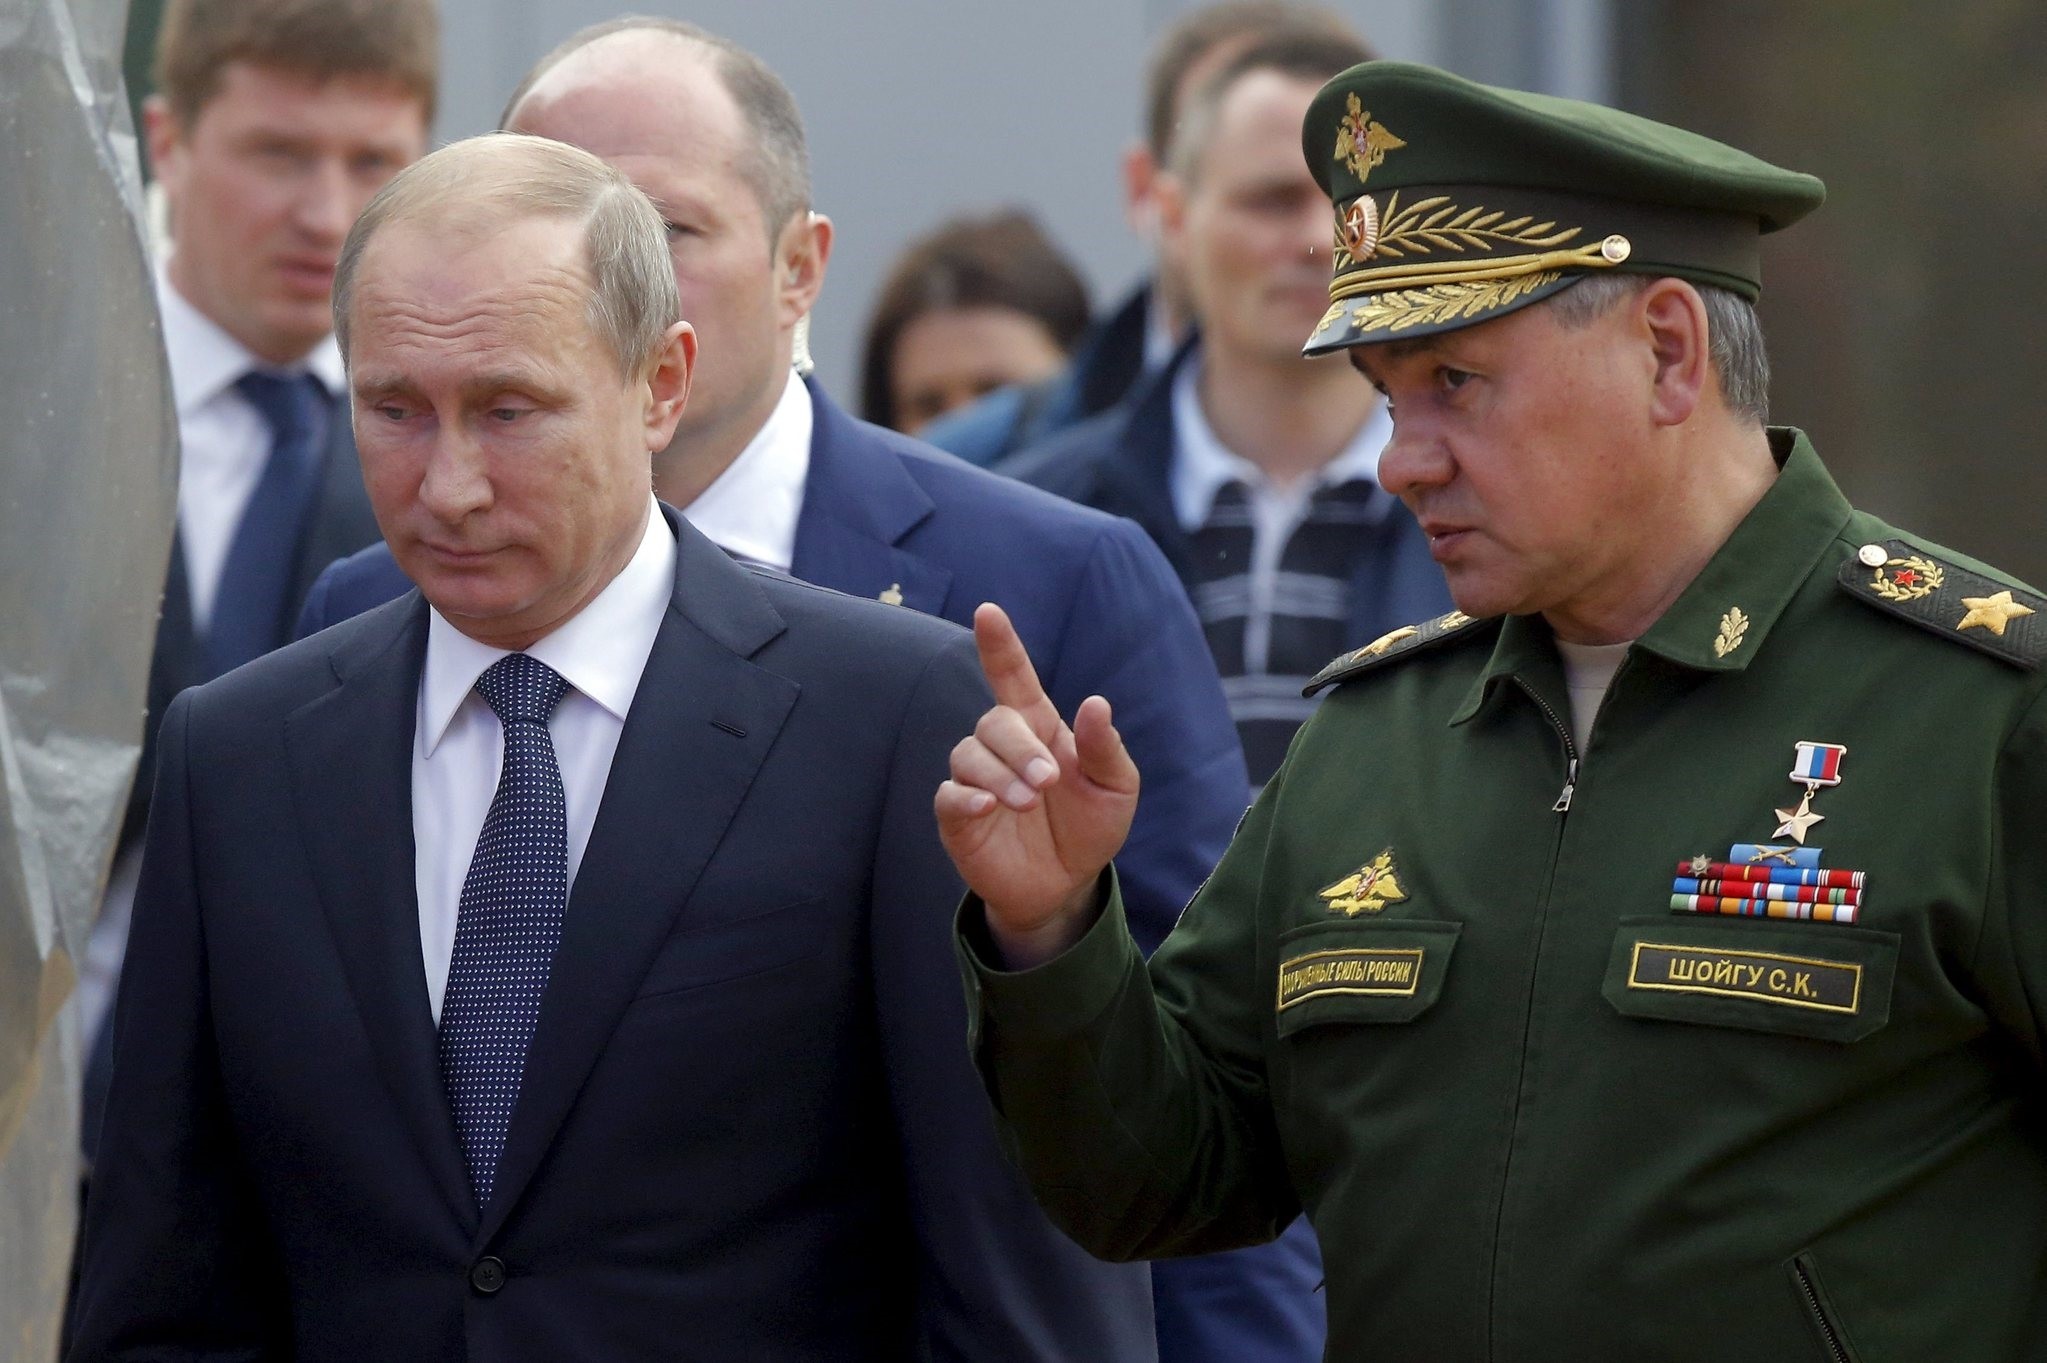 Putin (L) listens to Defence Minister Sergei Shoigu as they arrive for the opening of the Army-2015 intu2019l military forum. (REUTERS Photo)